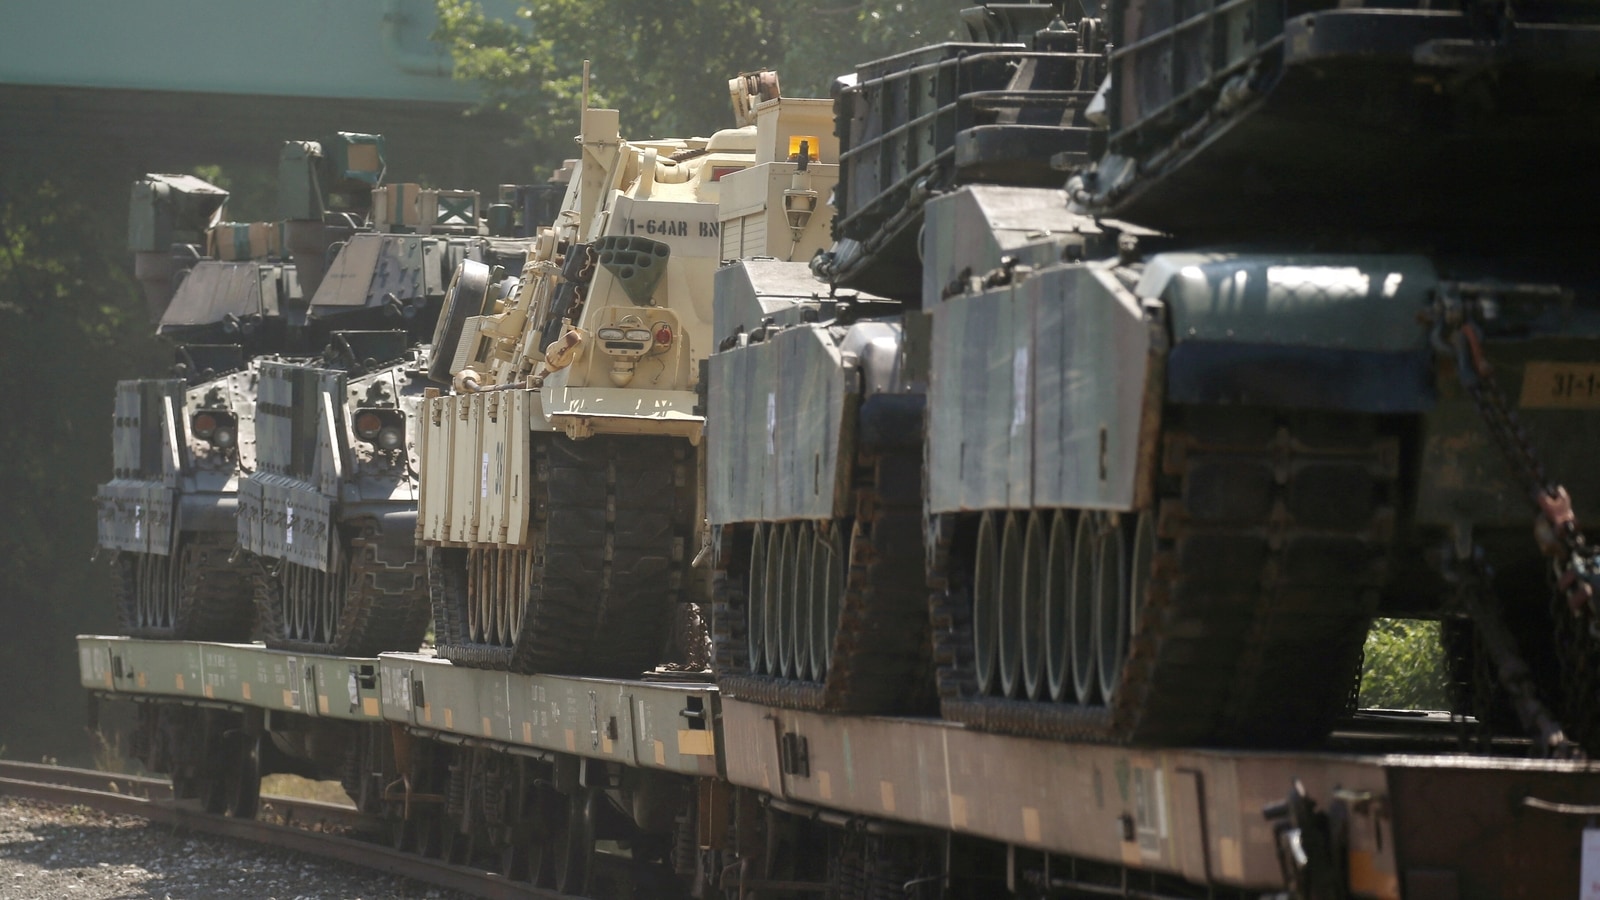 In reversal, US agrees to send 31 Abrams tanks to Ukraine